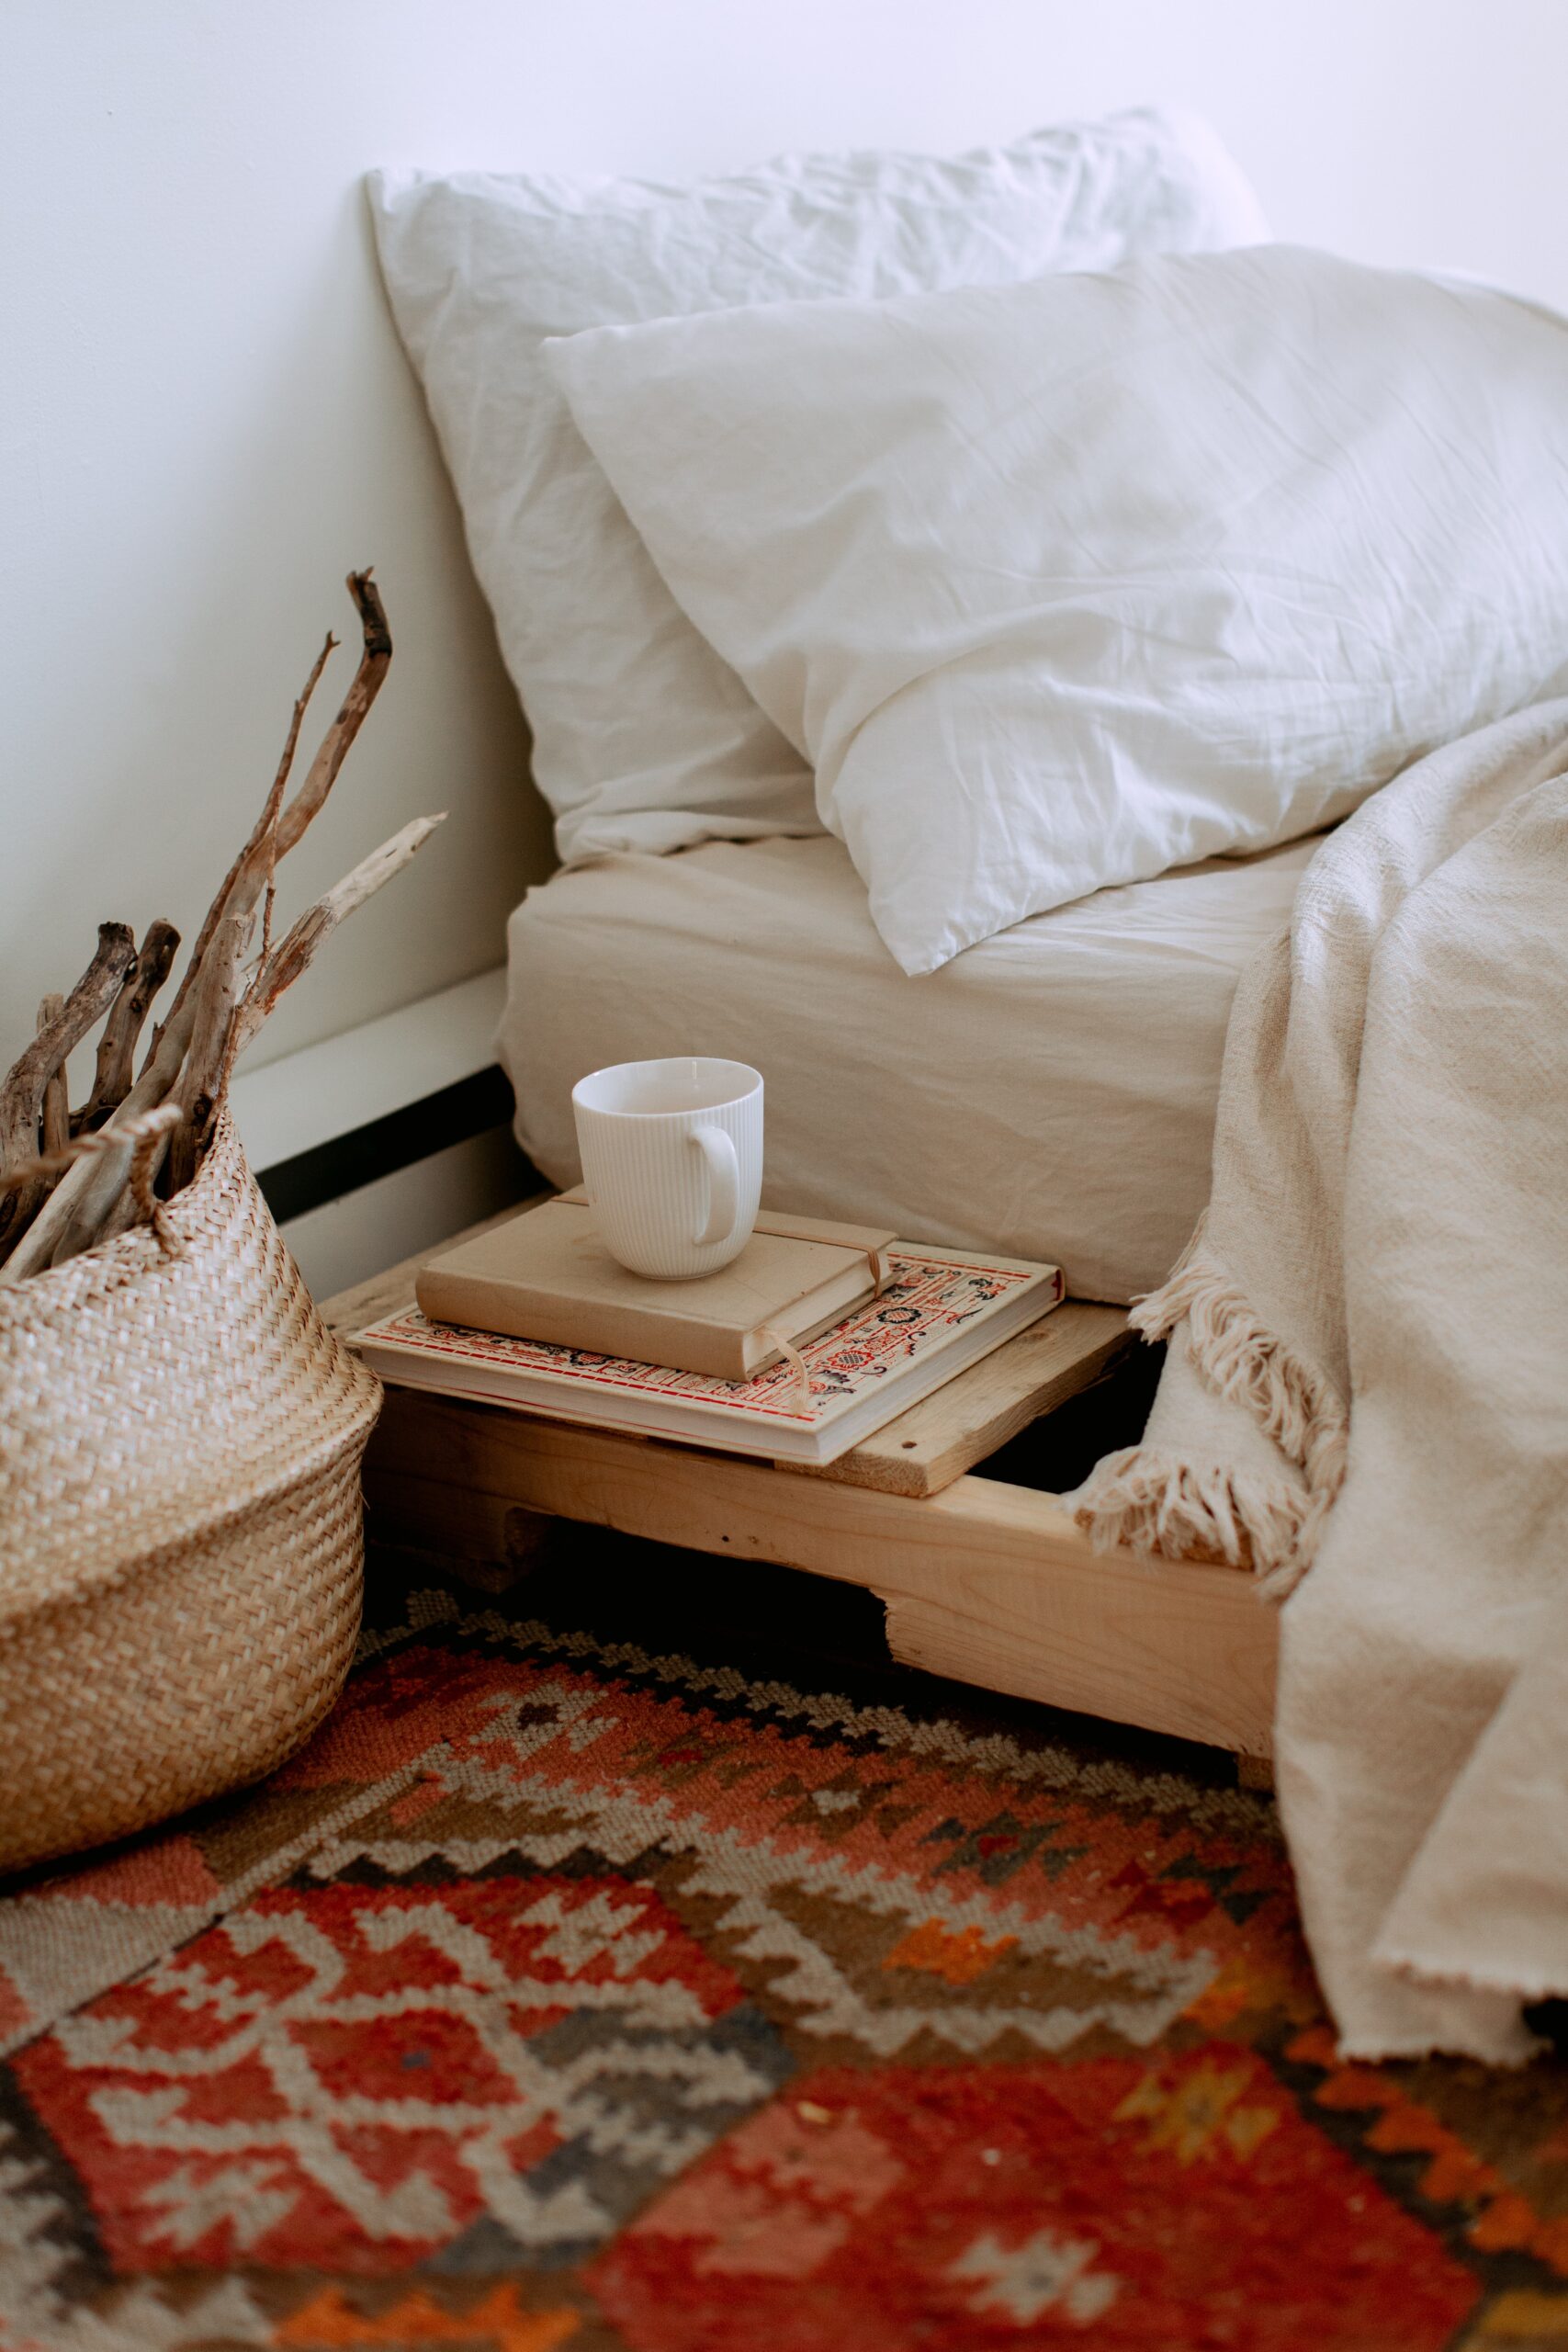 4 Simple Storage Ideas for Small Spaces on a Budget – Simplified Motherhood